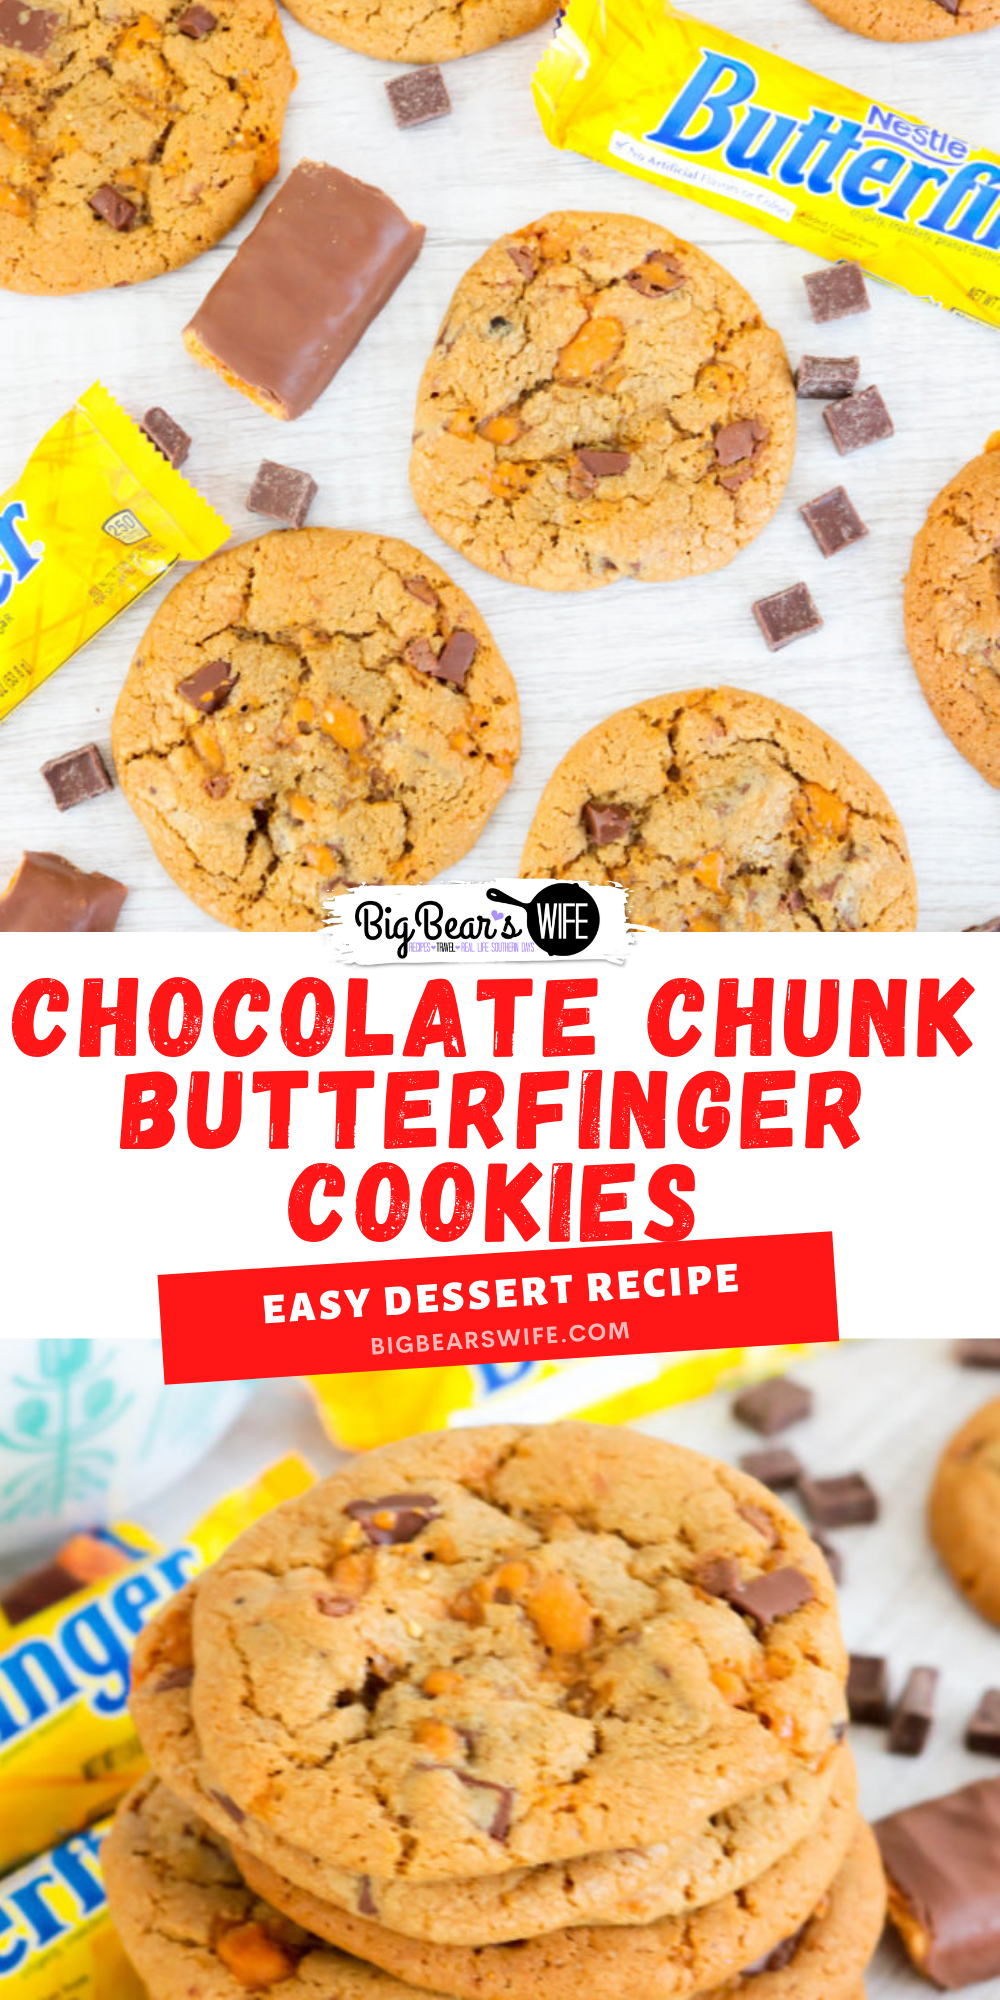 These Chocolate Chunk Butterfinger Cookies are soft and chewy cookies packed with chocolate chunks and chopped Butterfinger Candy Bars. One bite of these and you’ll feel like a kid in a candy store!! via @bigbearswife